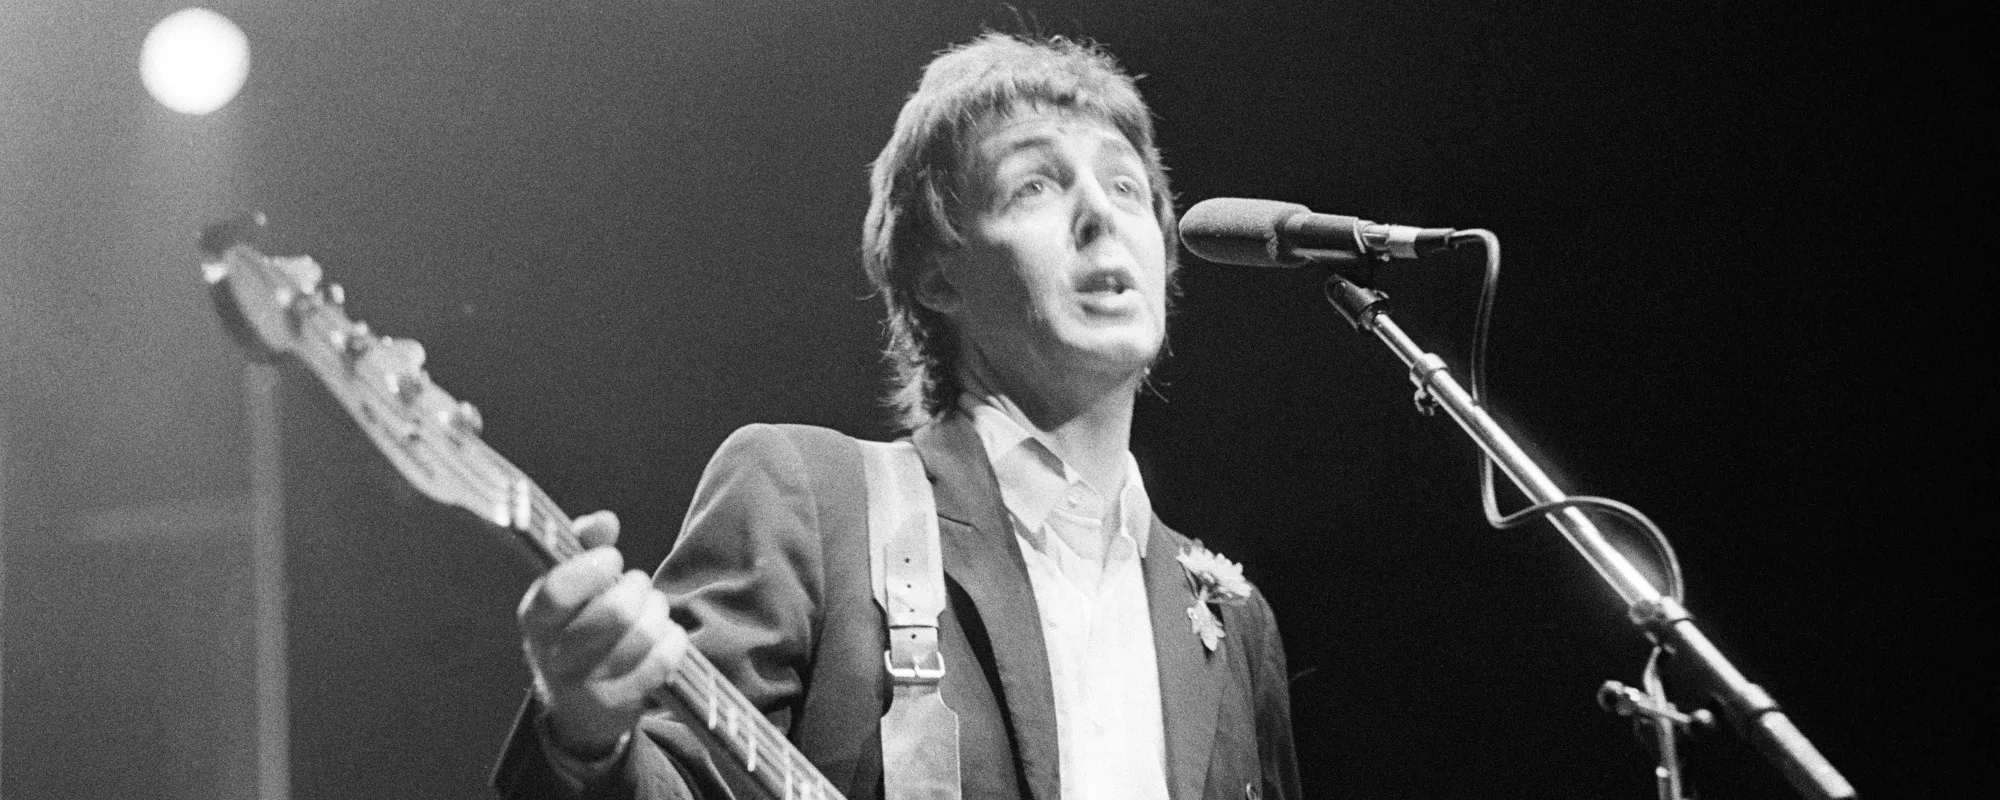 Ranking the 5 Best Songs on the Paul McCartney and Wings’ Album ‘Wings at the Speed of Sound’